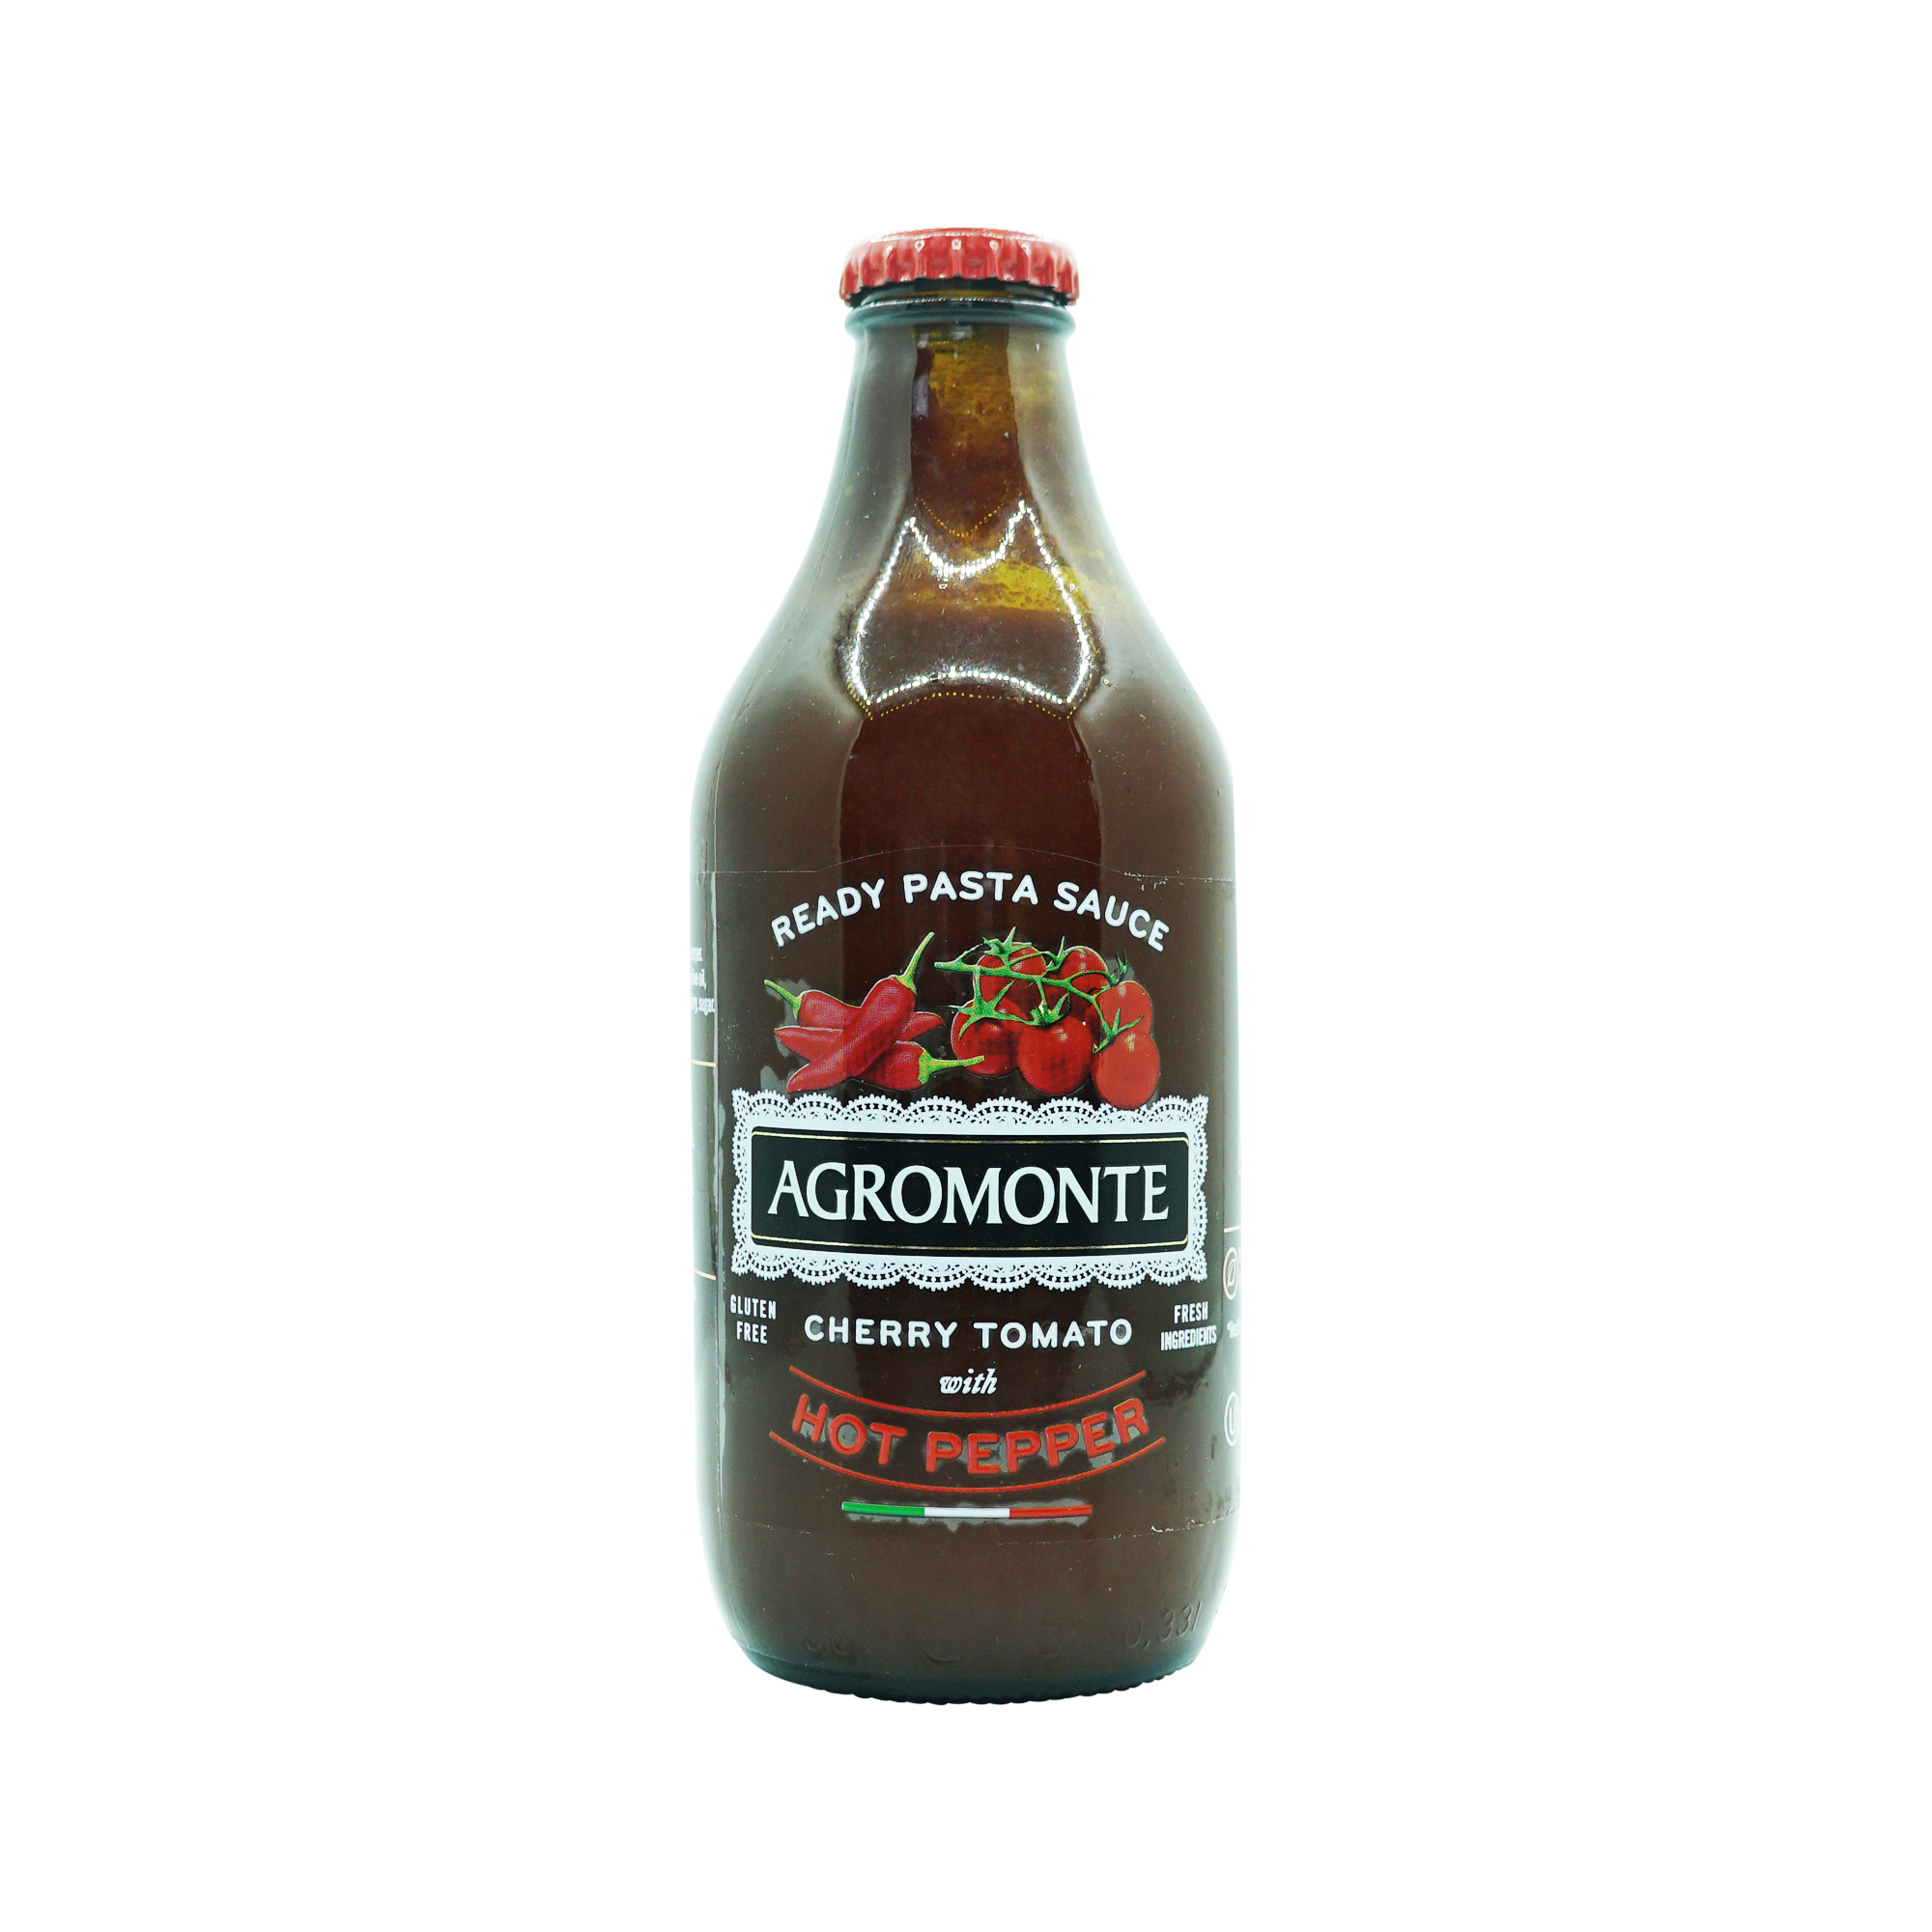 Agromonte Cherry Tomato with Hot Pepper Pasta Sauce (330g)